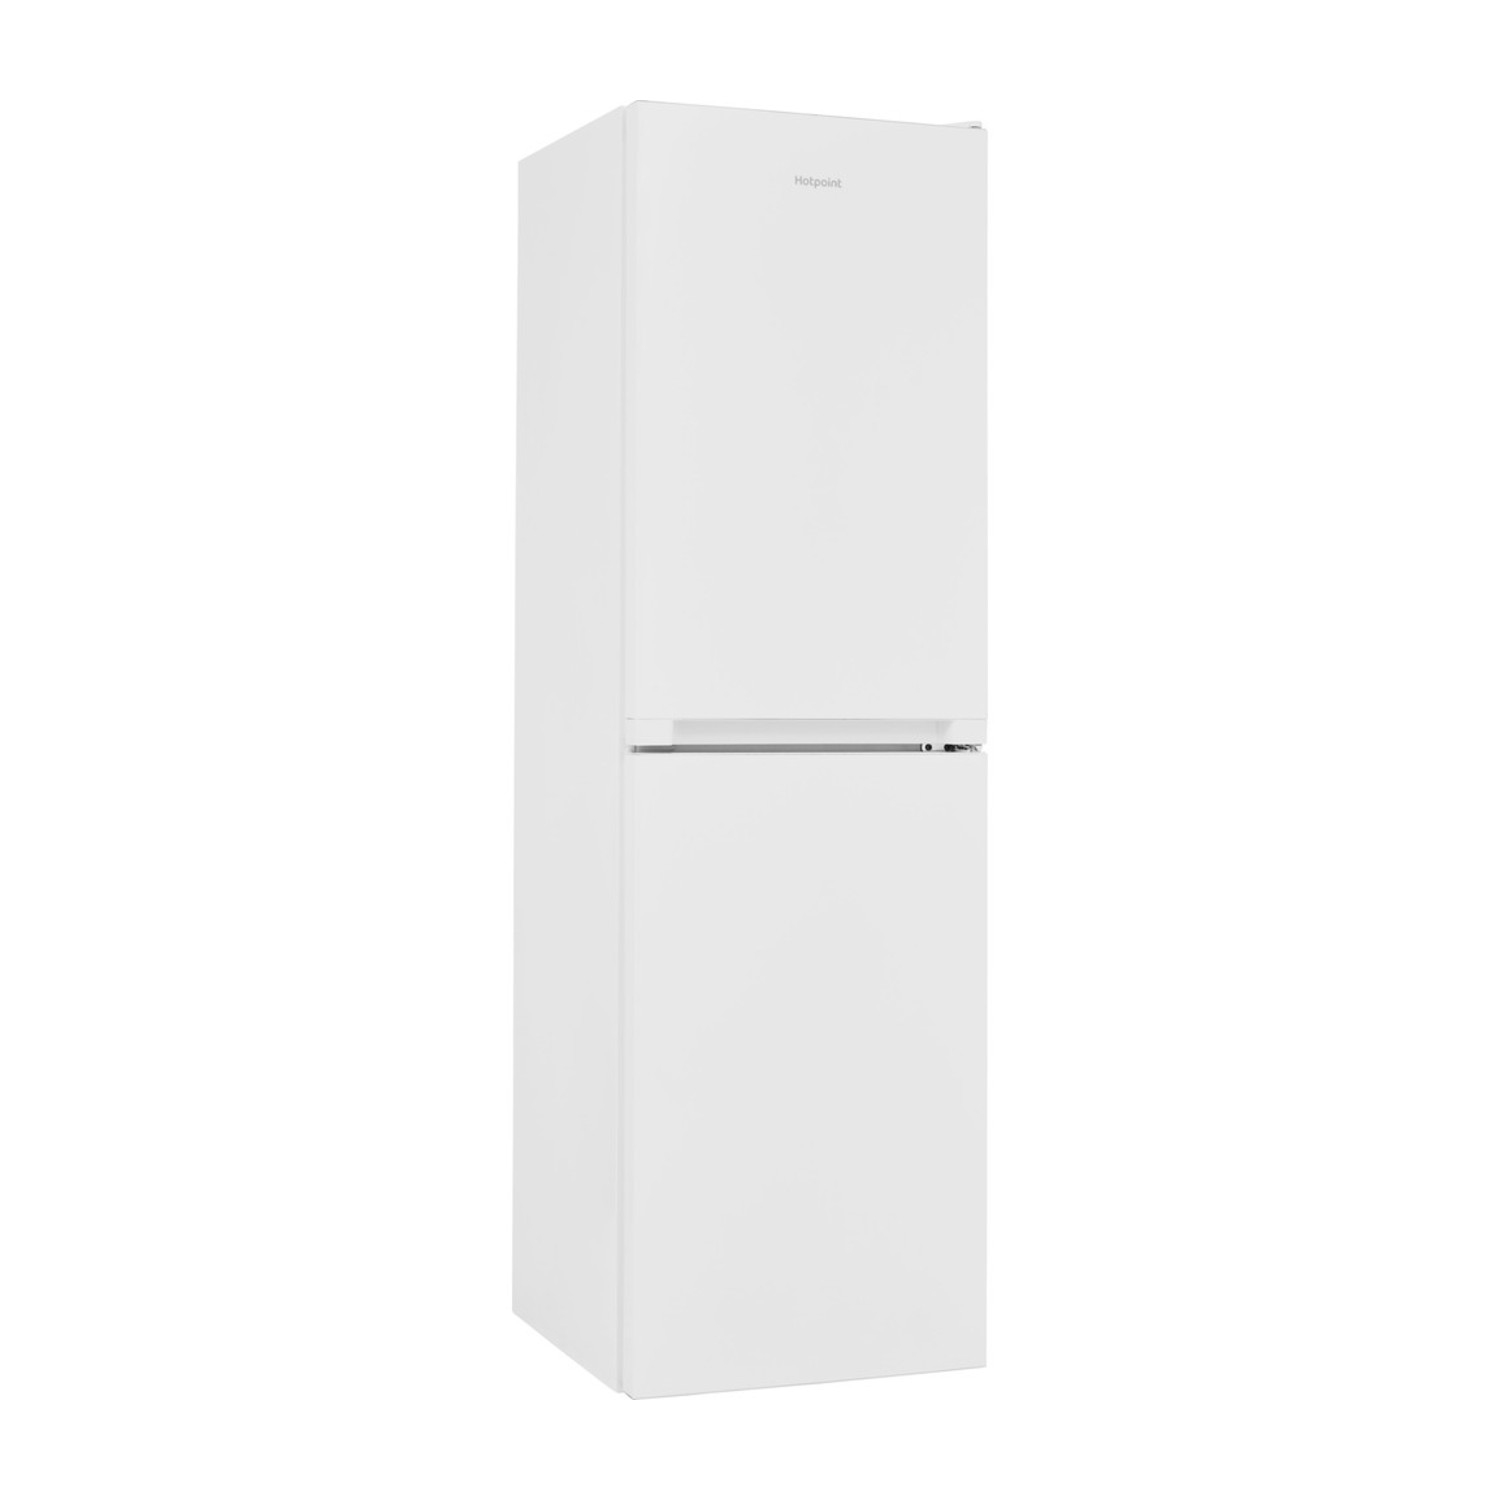 Hotpoint Frost Free Fridge Freezer - White - A+ Energy Rated - 4